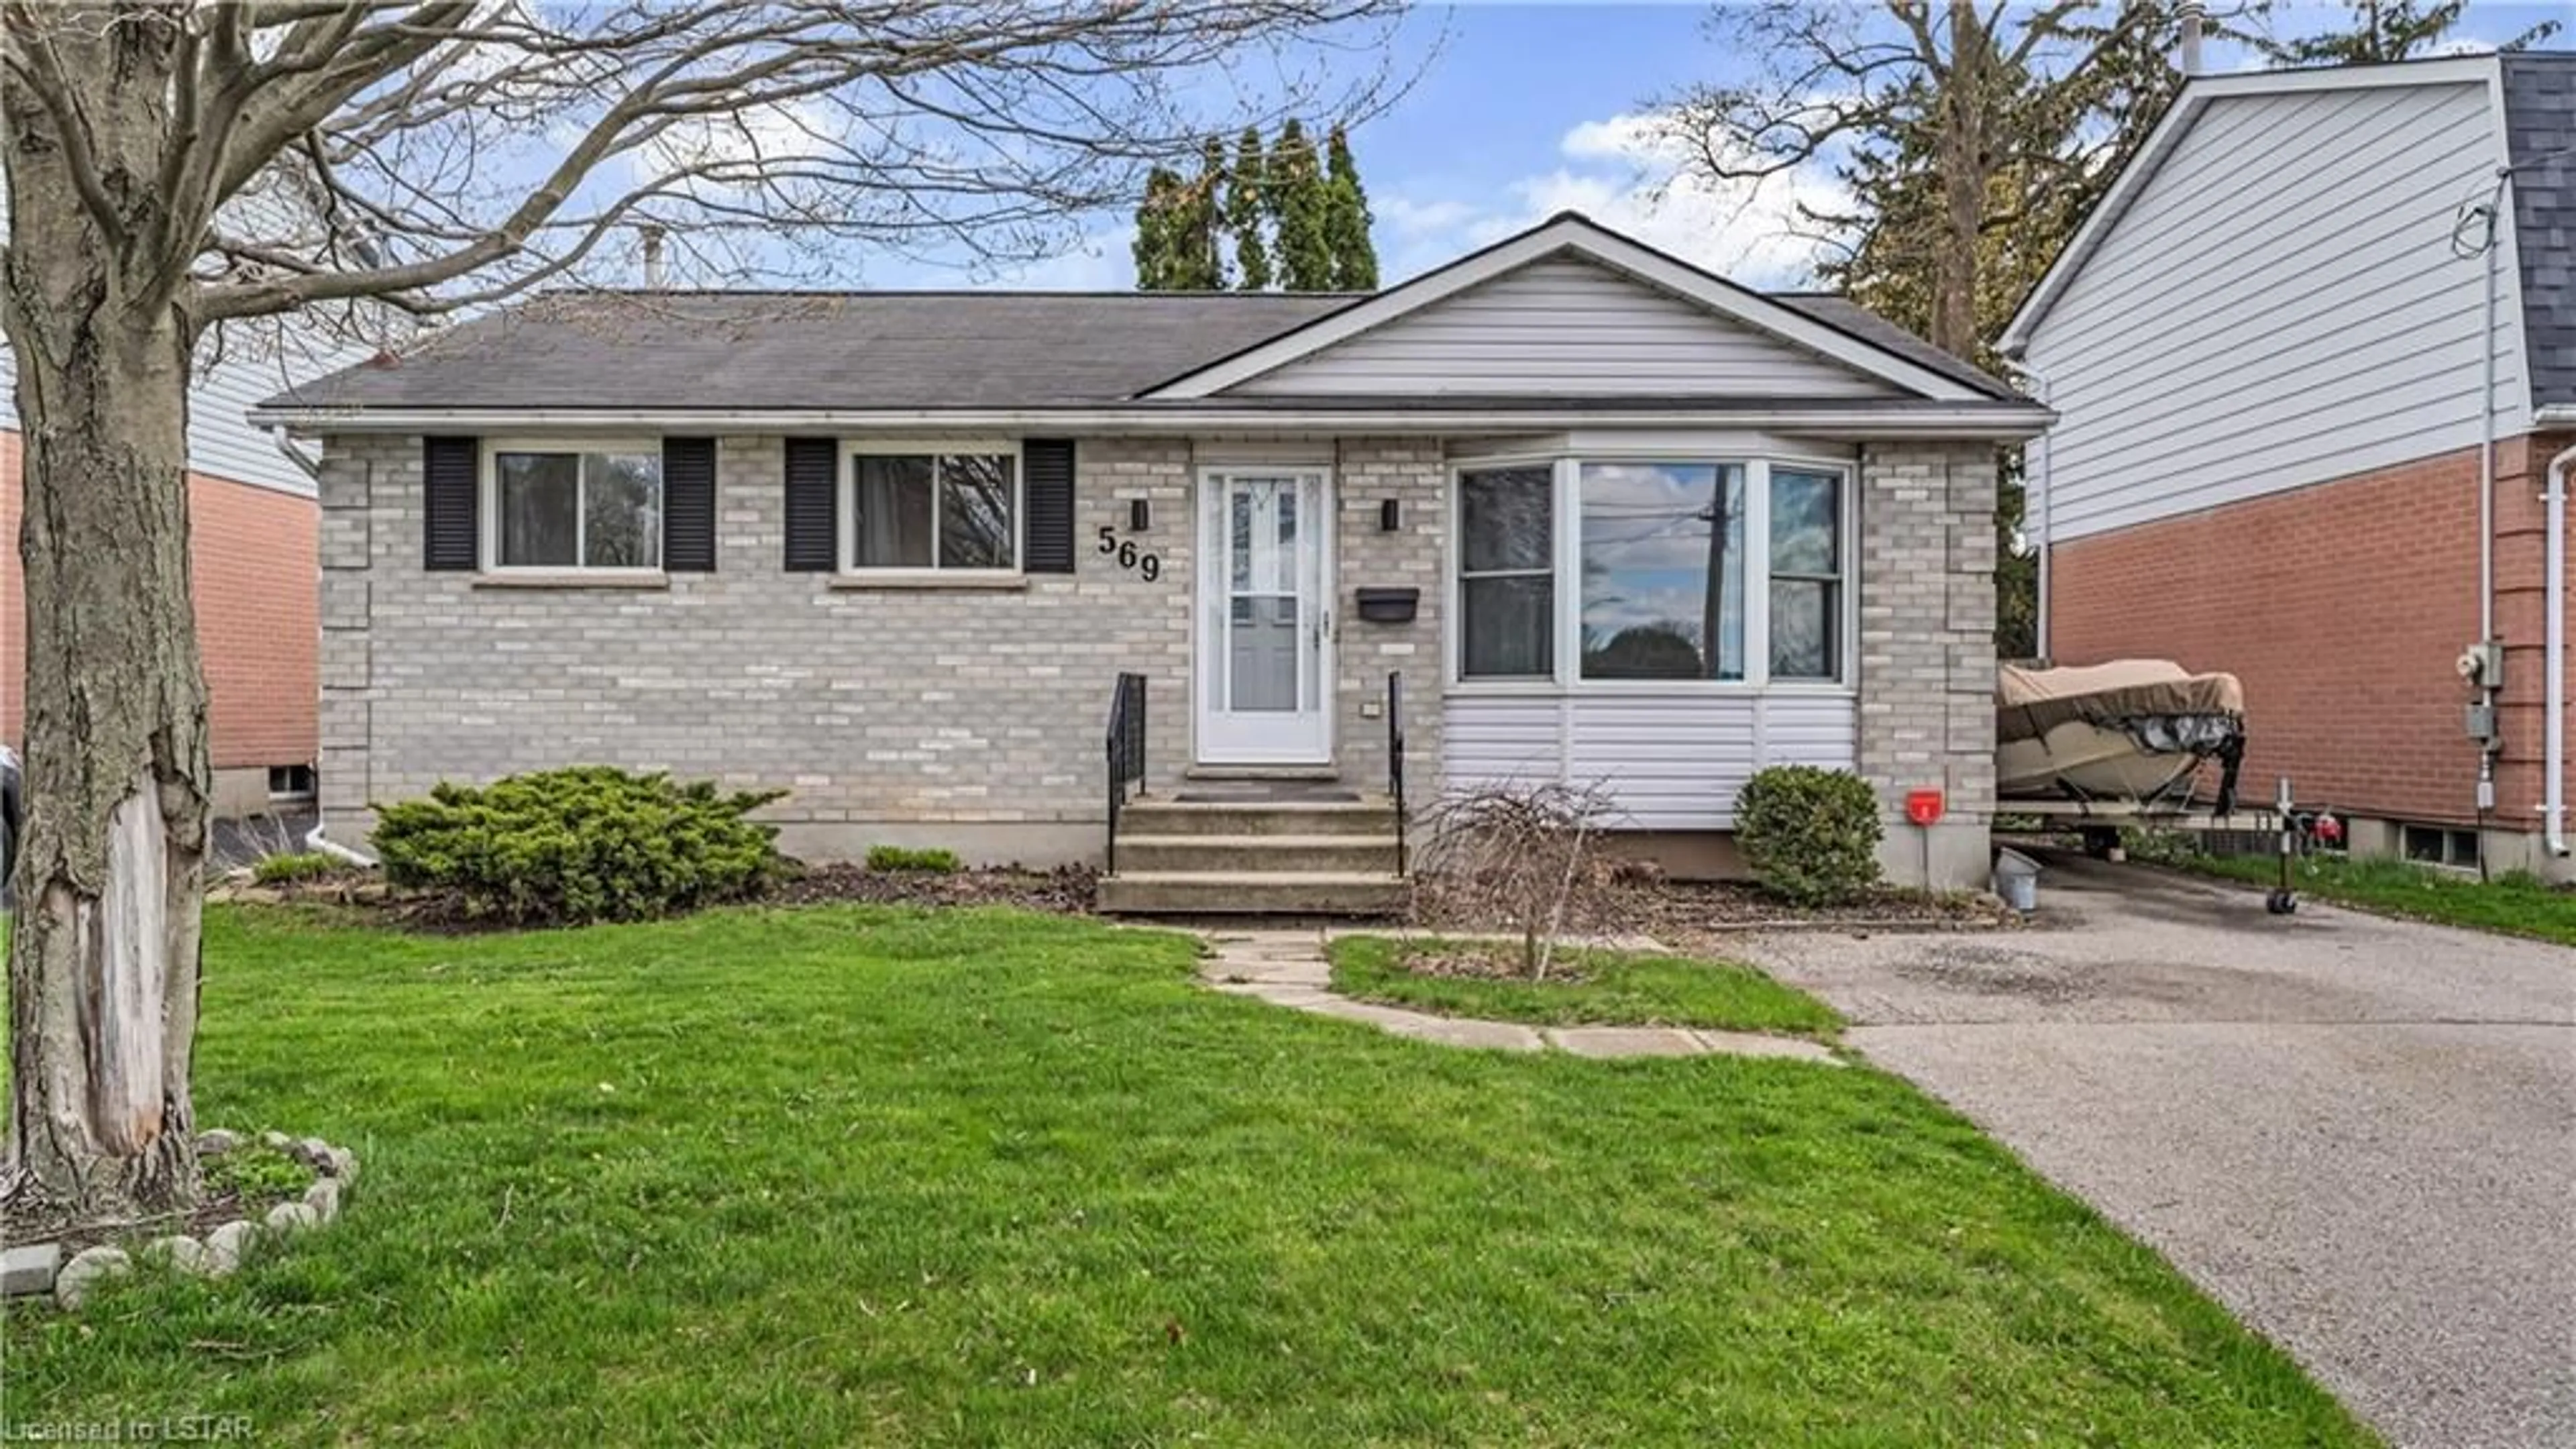 Frontside or backside of a home for 569 Elm St, St. Thomas Ontario N5R 1K6